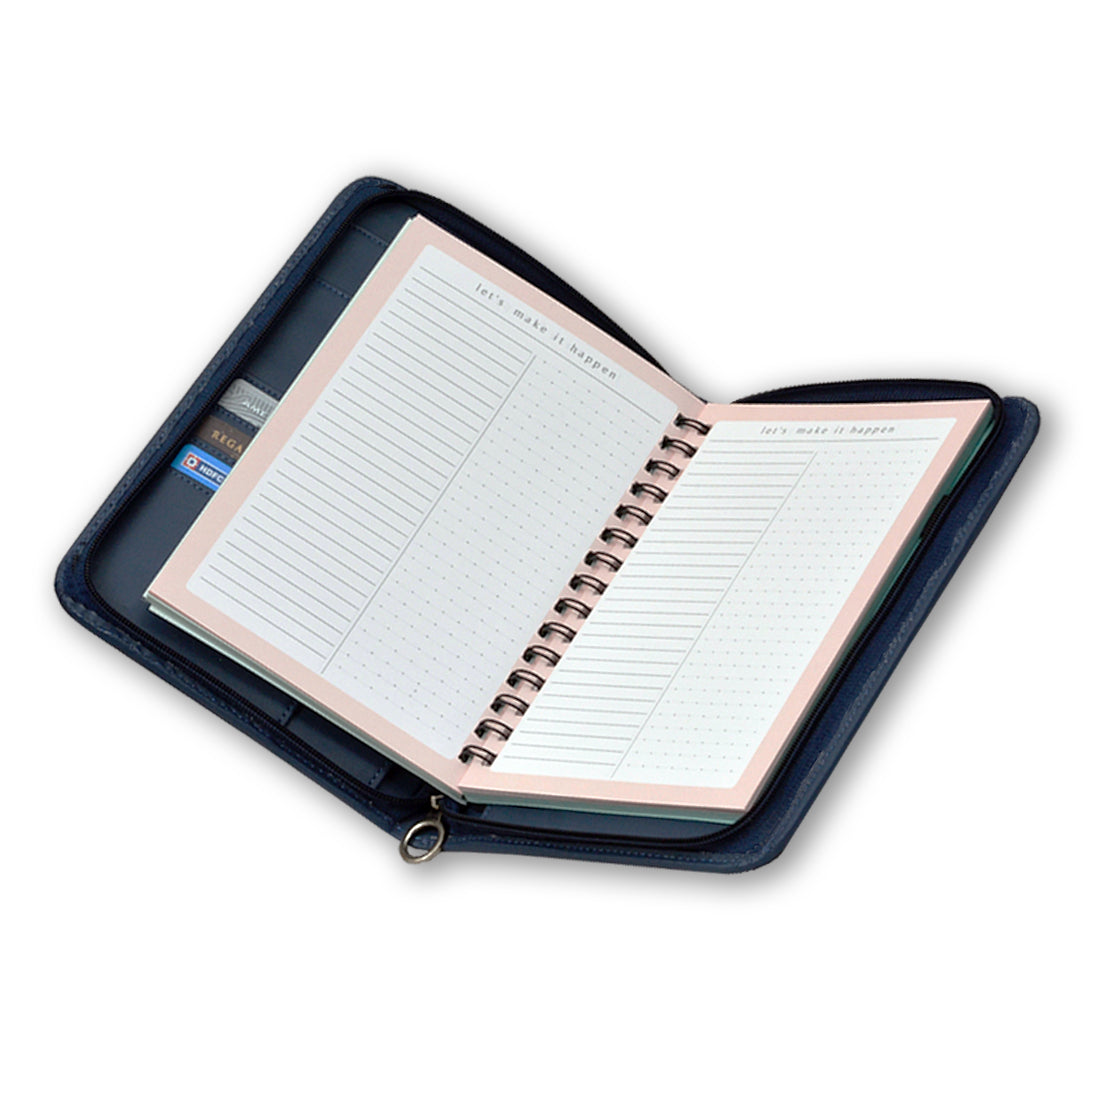 Executive Blue Corporate Undated business diary / Organizer Planner Set with To - Do - List